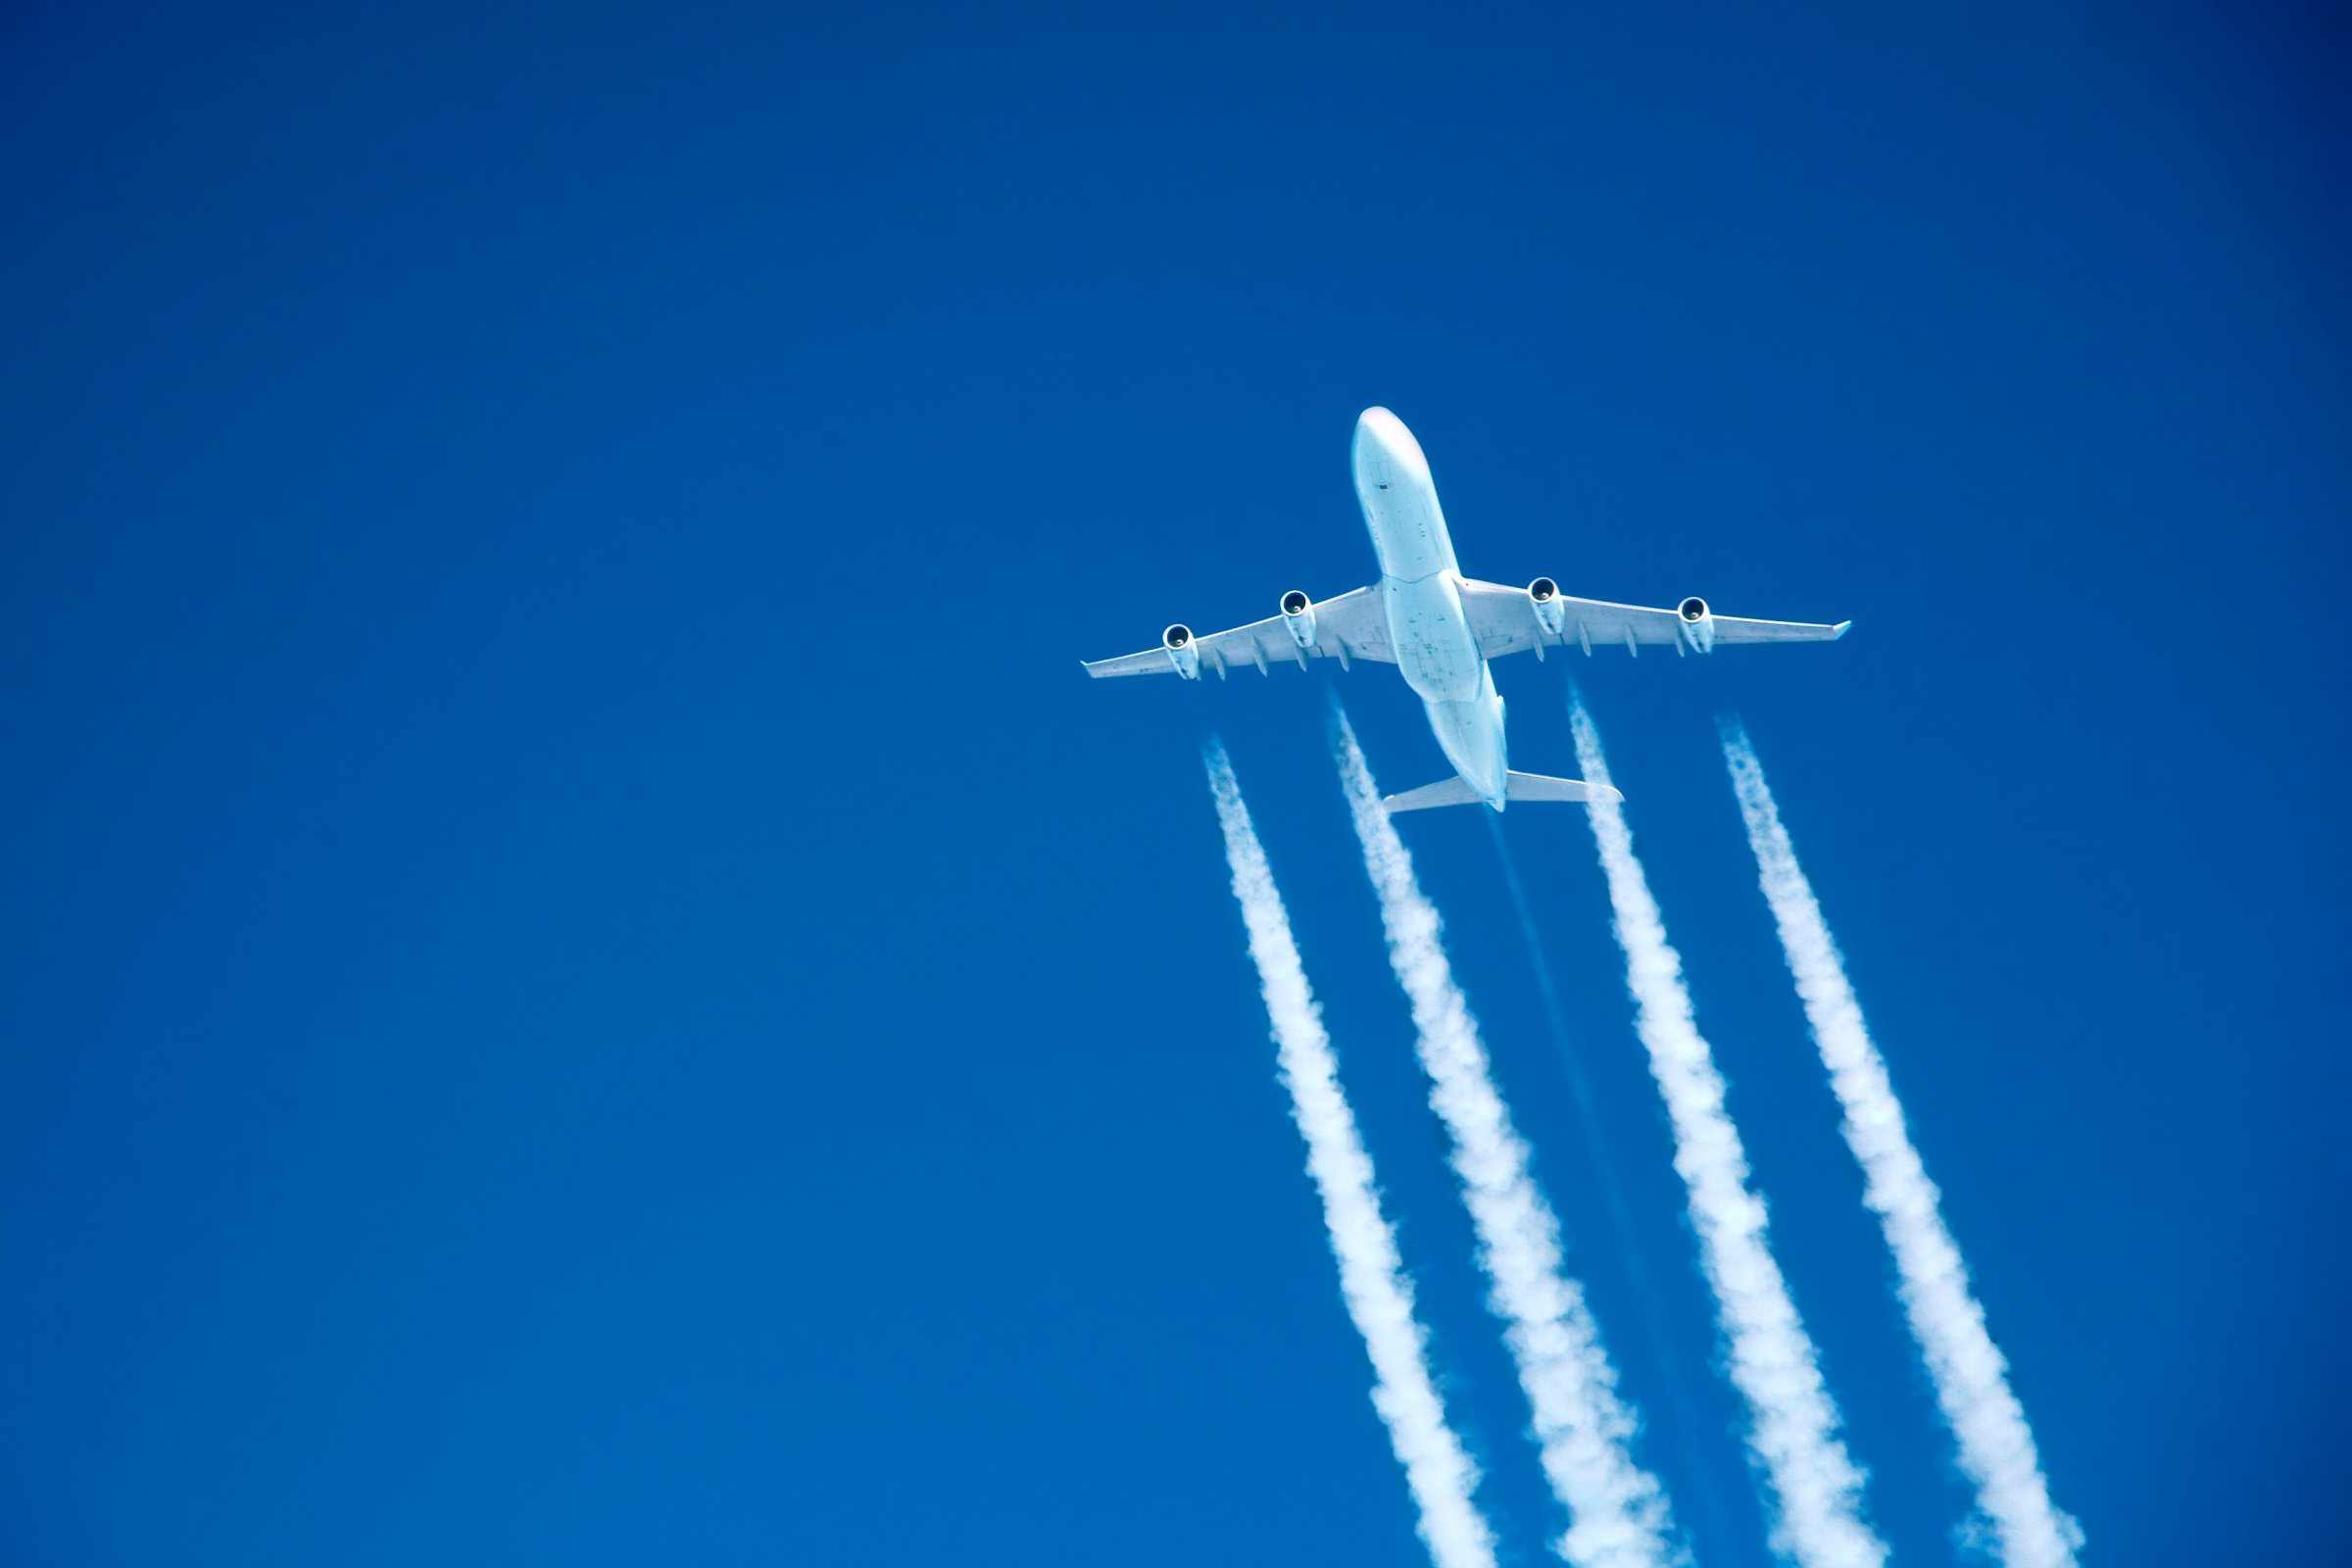 contrails streaming from a jumbo jet on blue sky at altitude